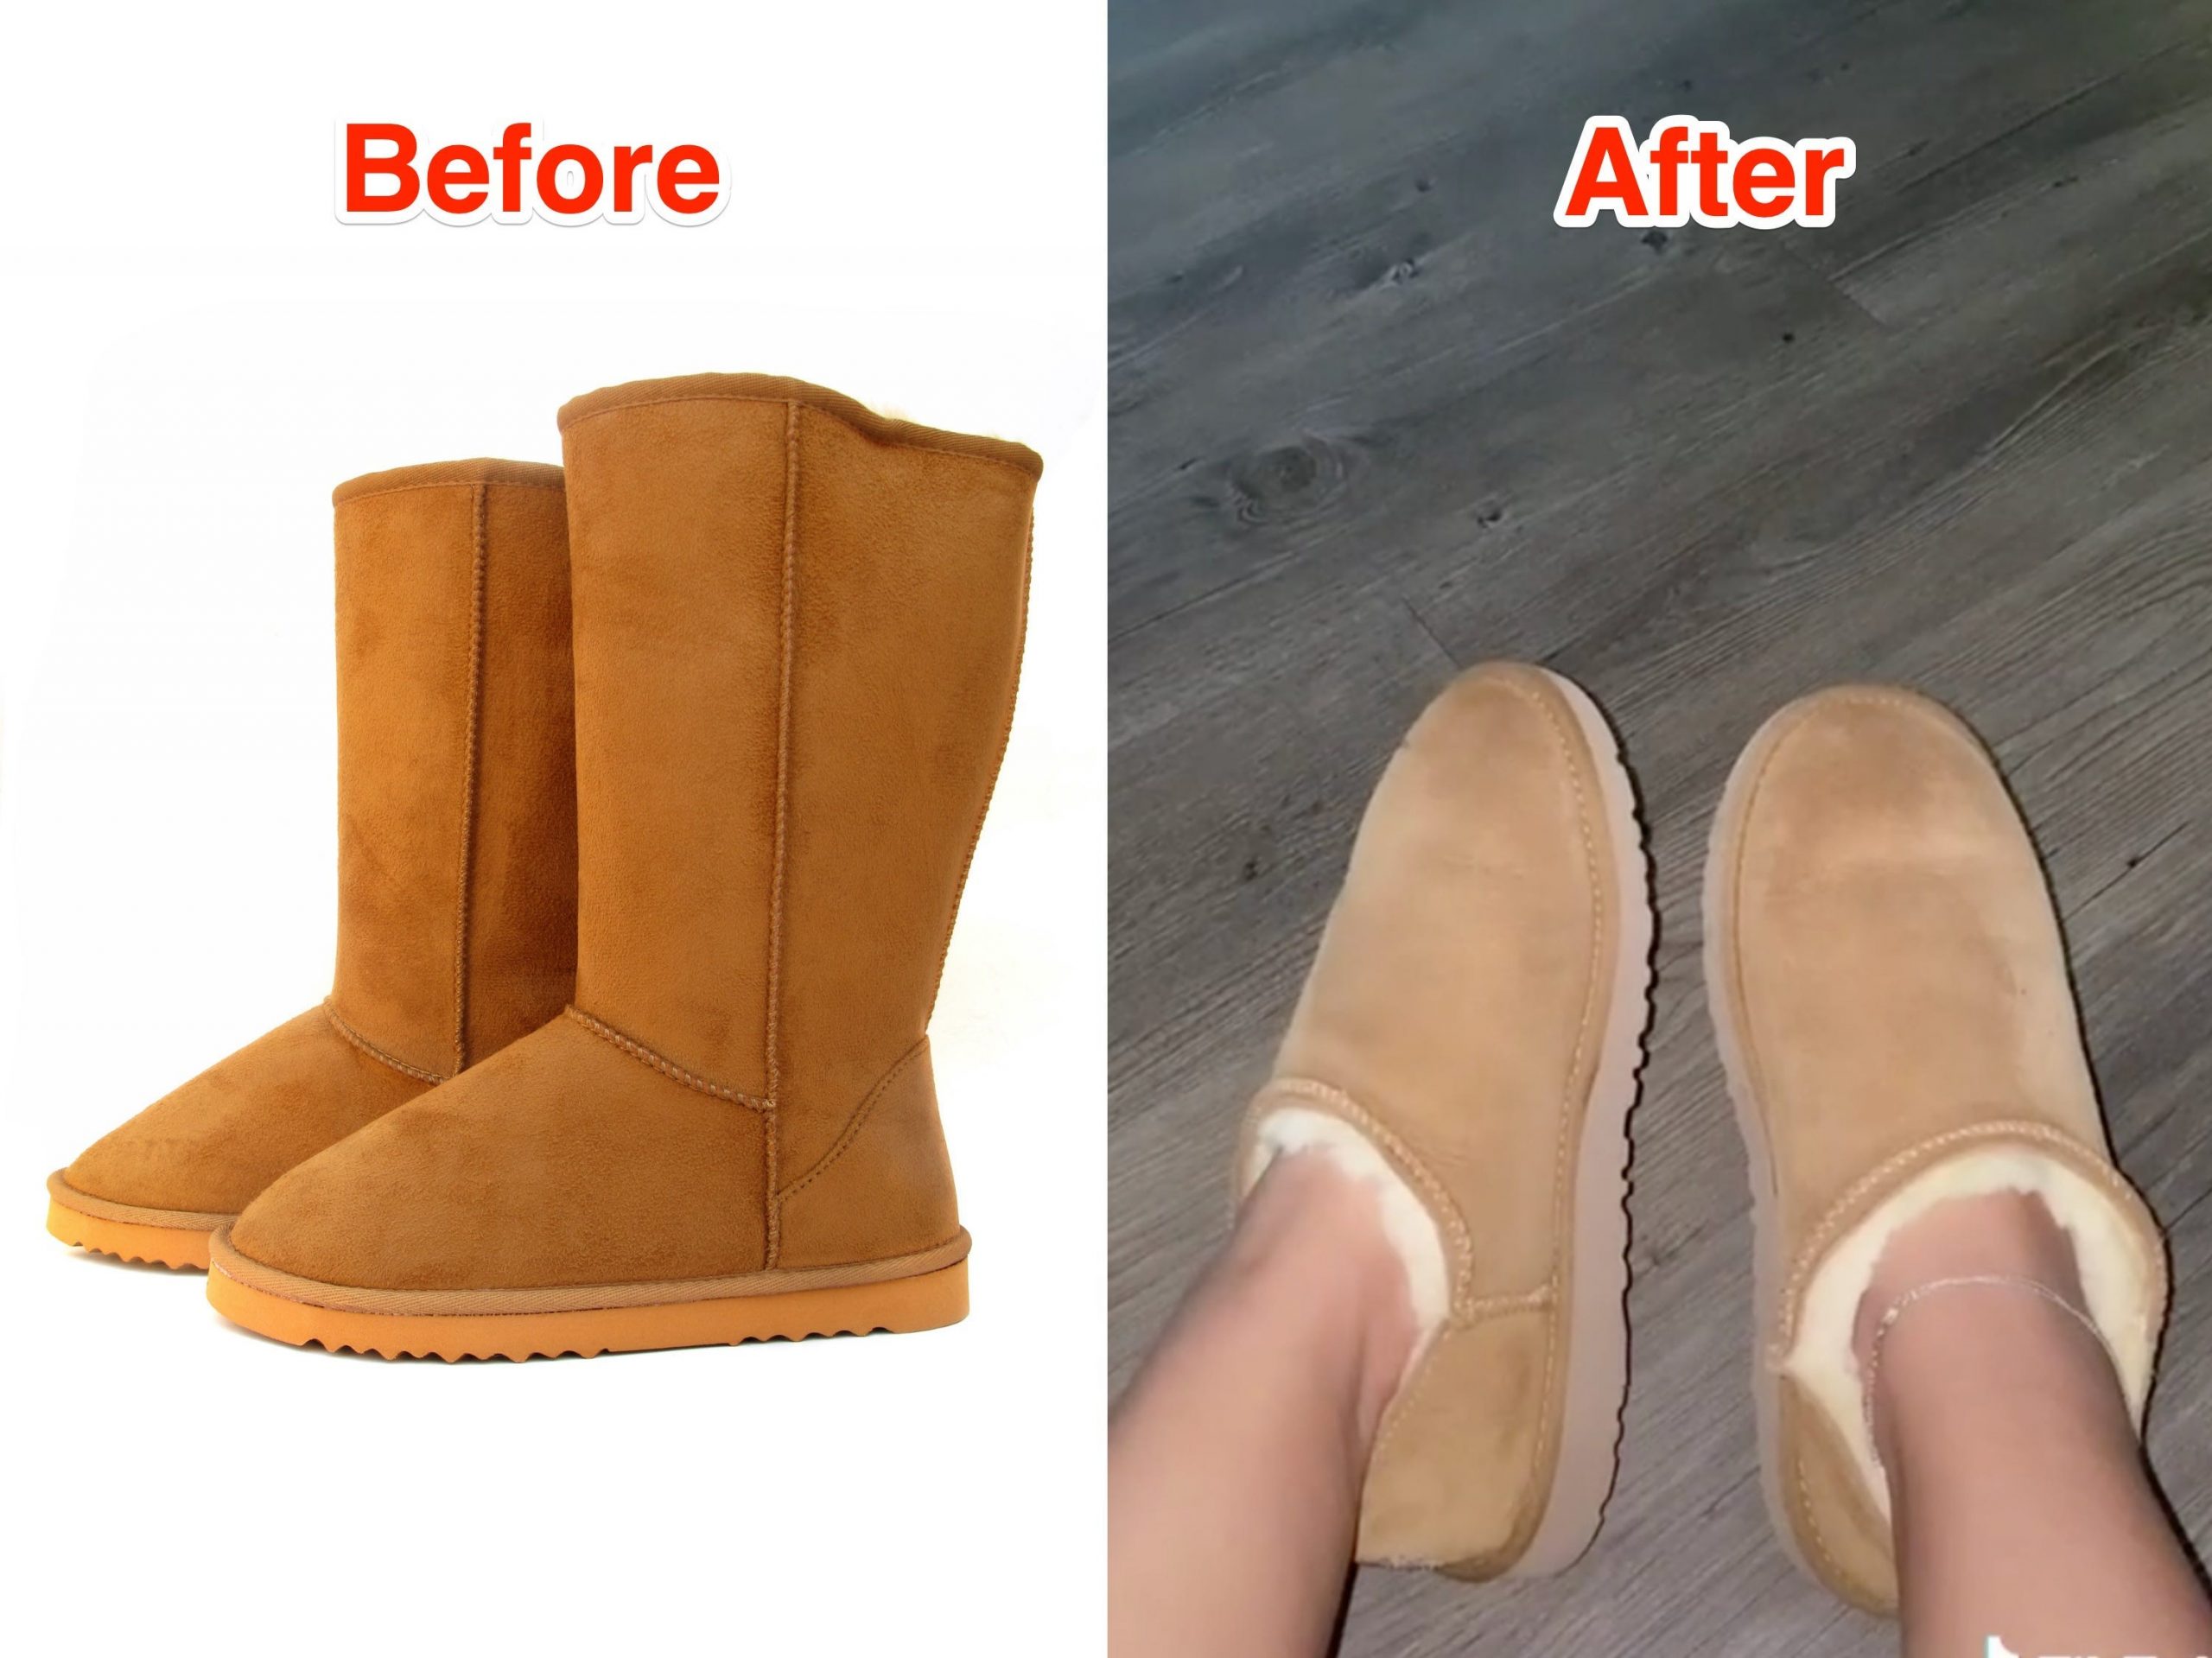 People On Tiktok Are Giving Old Ugg Boots A New Look By Cutting Them